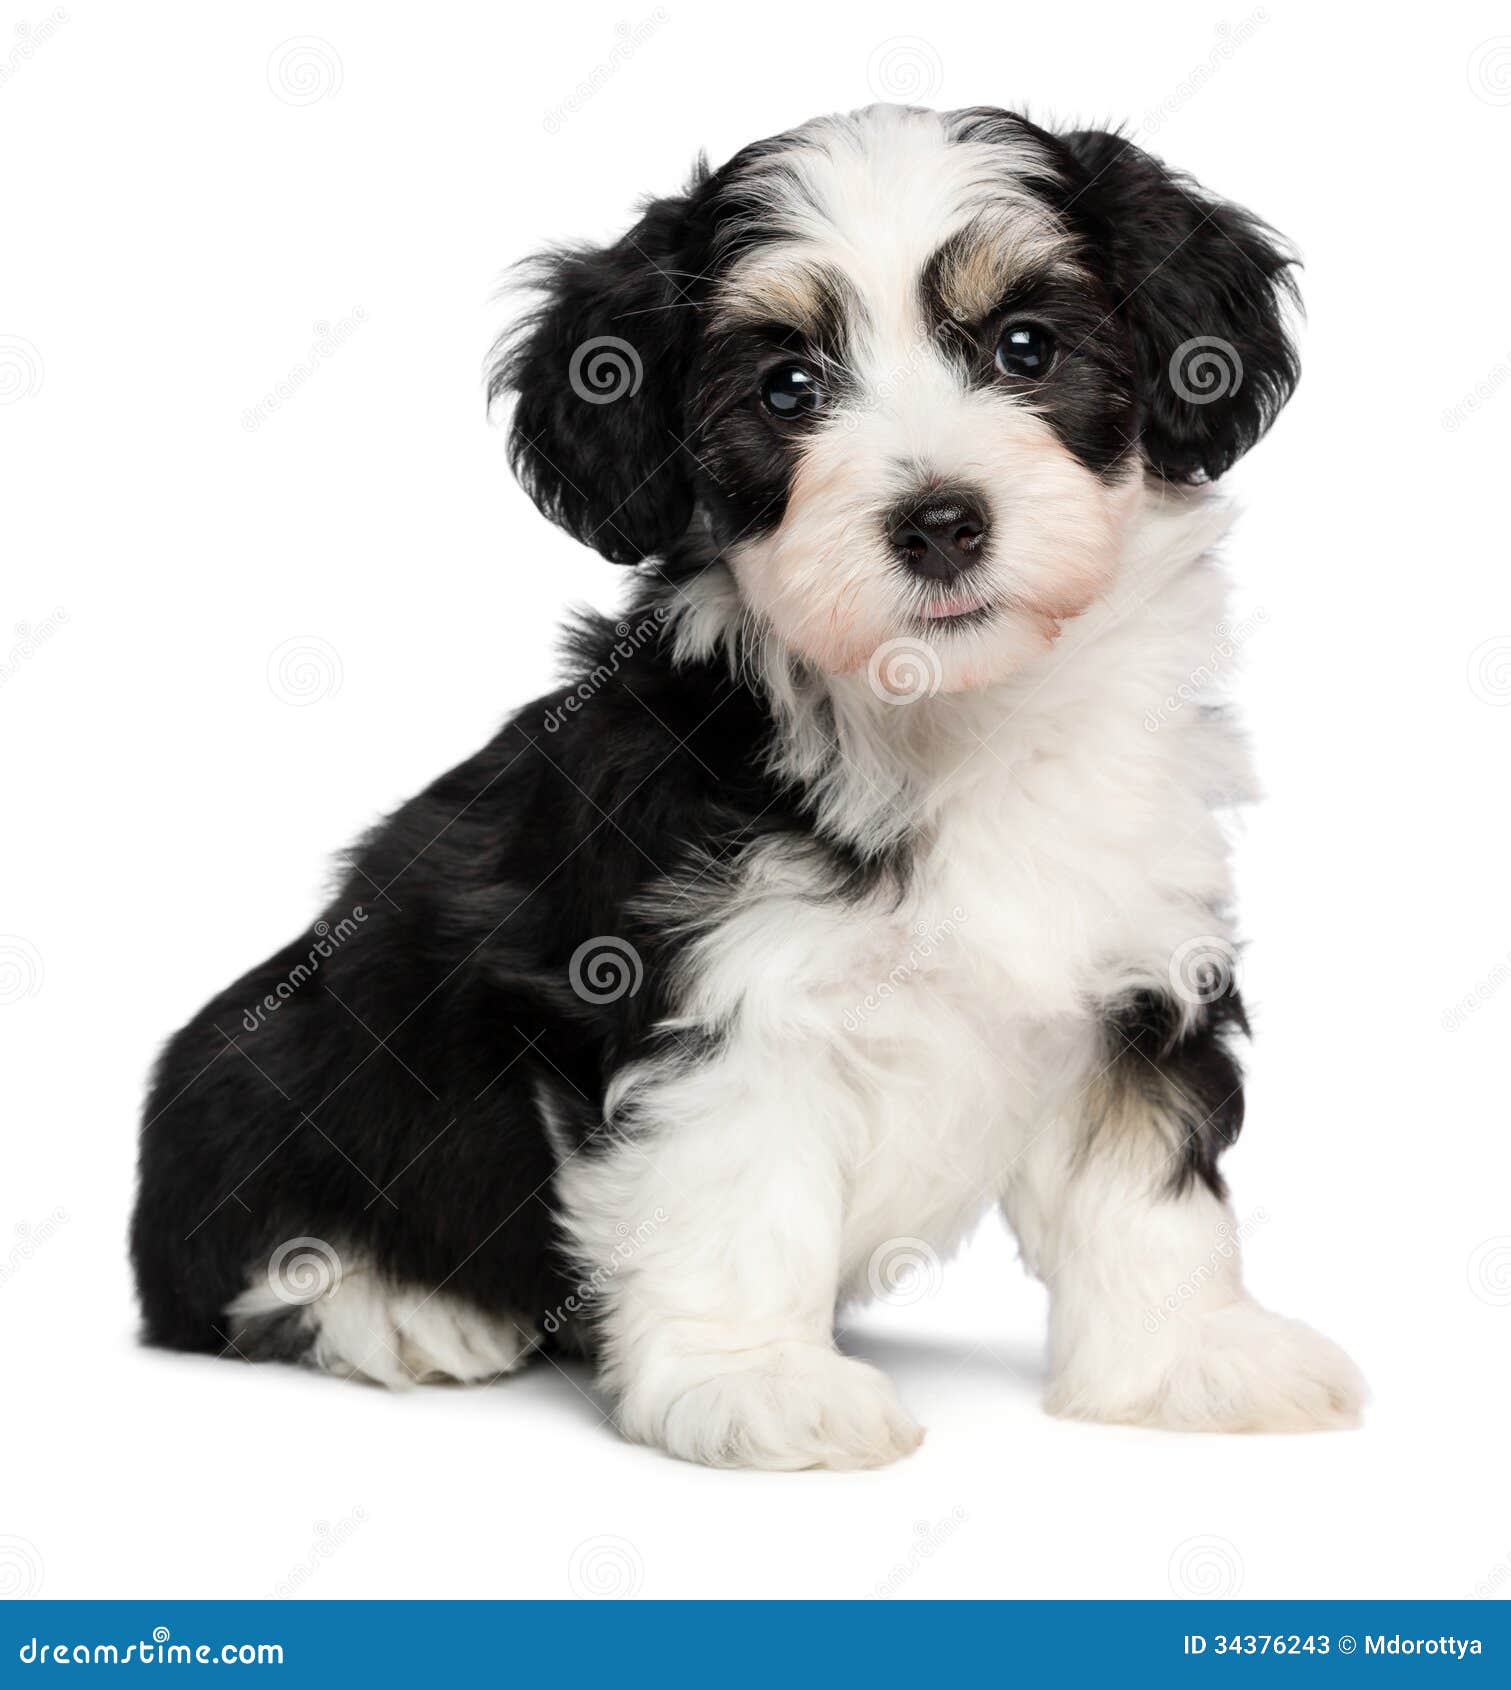 A Beautiful Sitting Tricolor Havanese Puppy Dog Stock ...